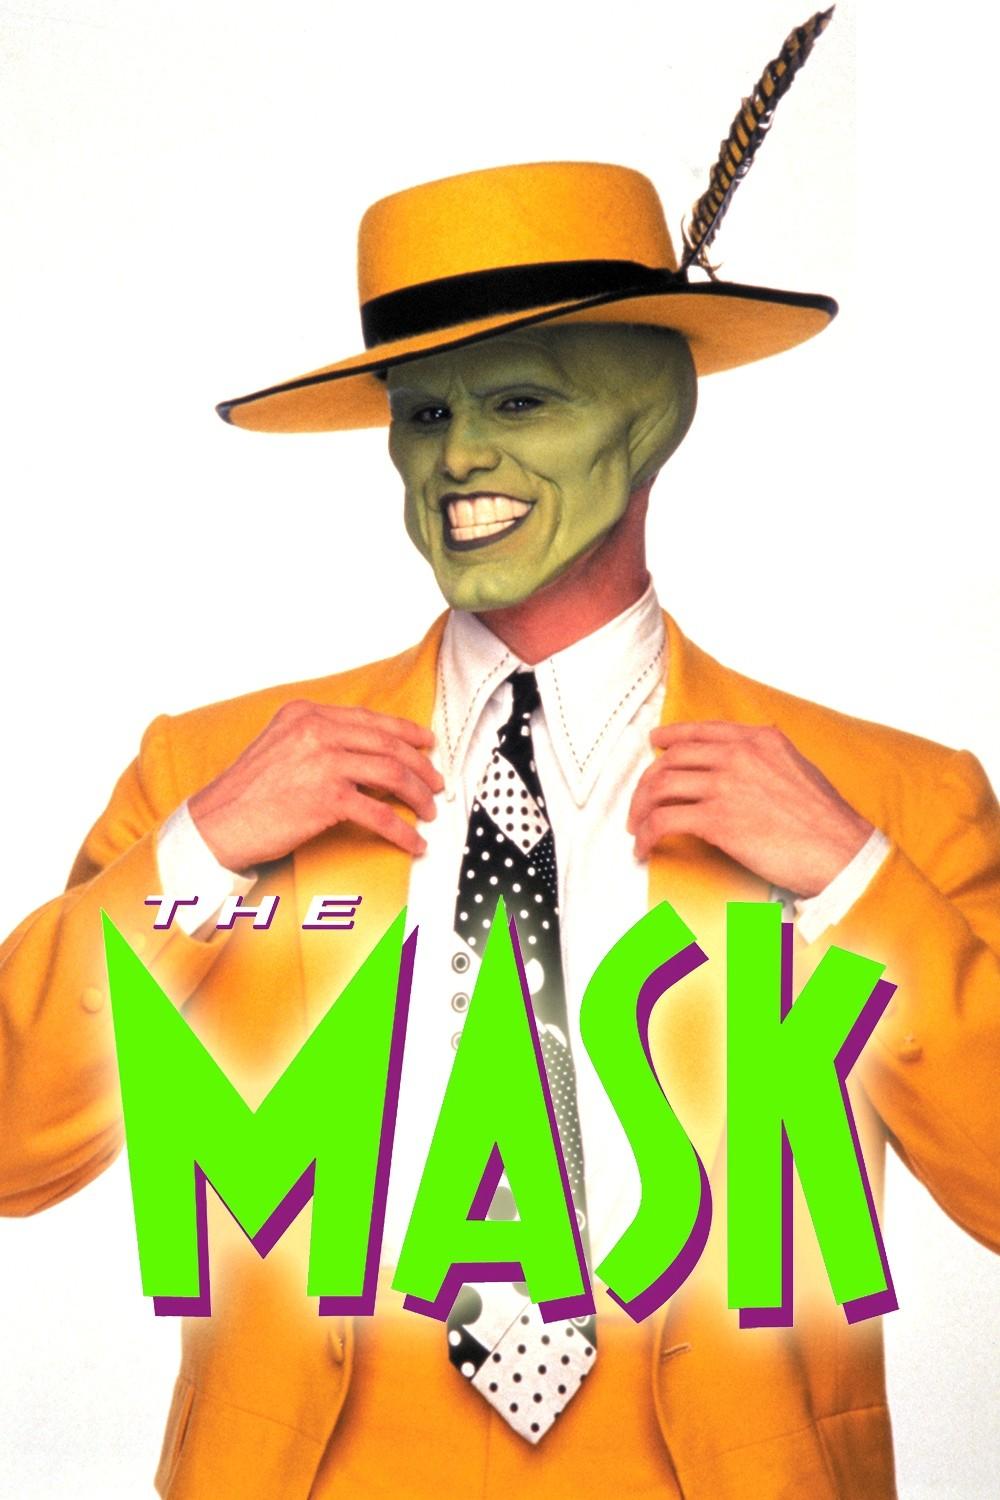 The Mask: A man, a culture, a people